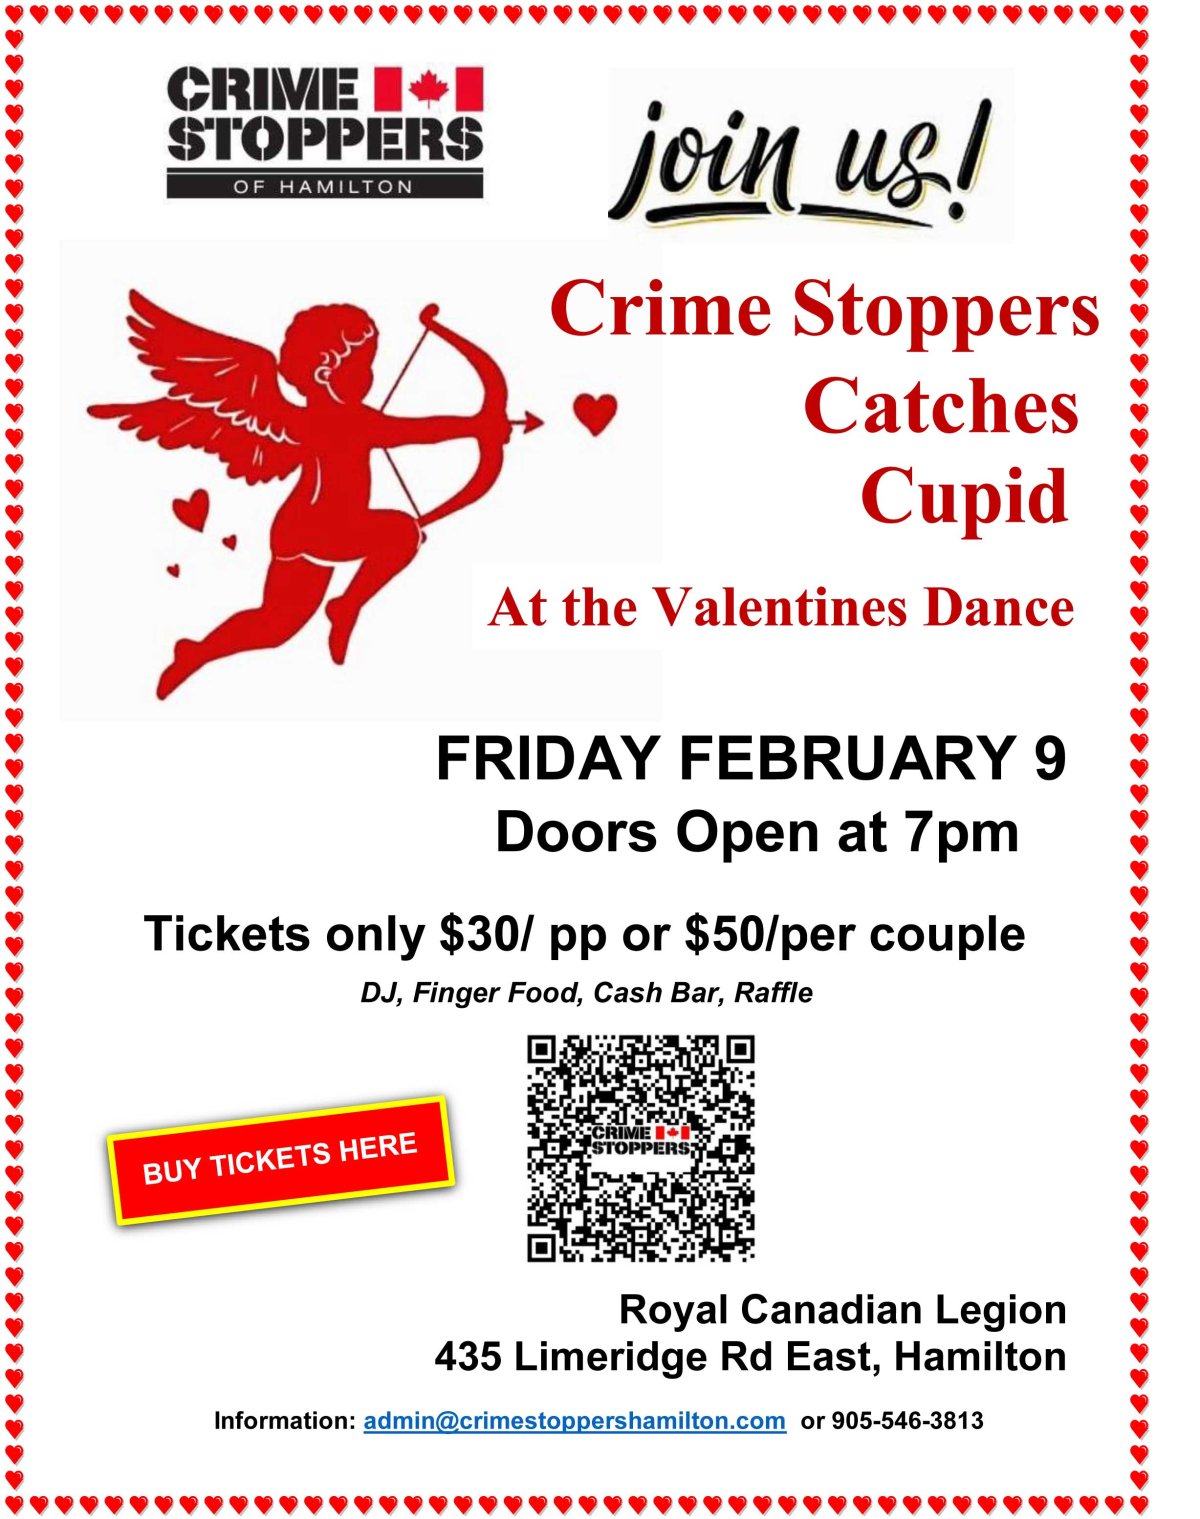 Crime Stoppers Catches Cupid at the Valentines Dance - image